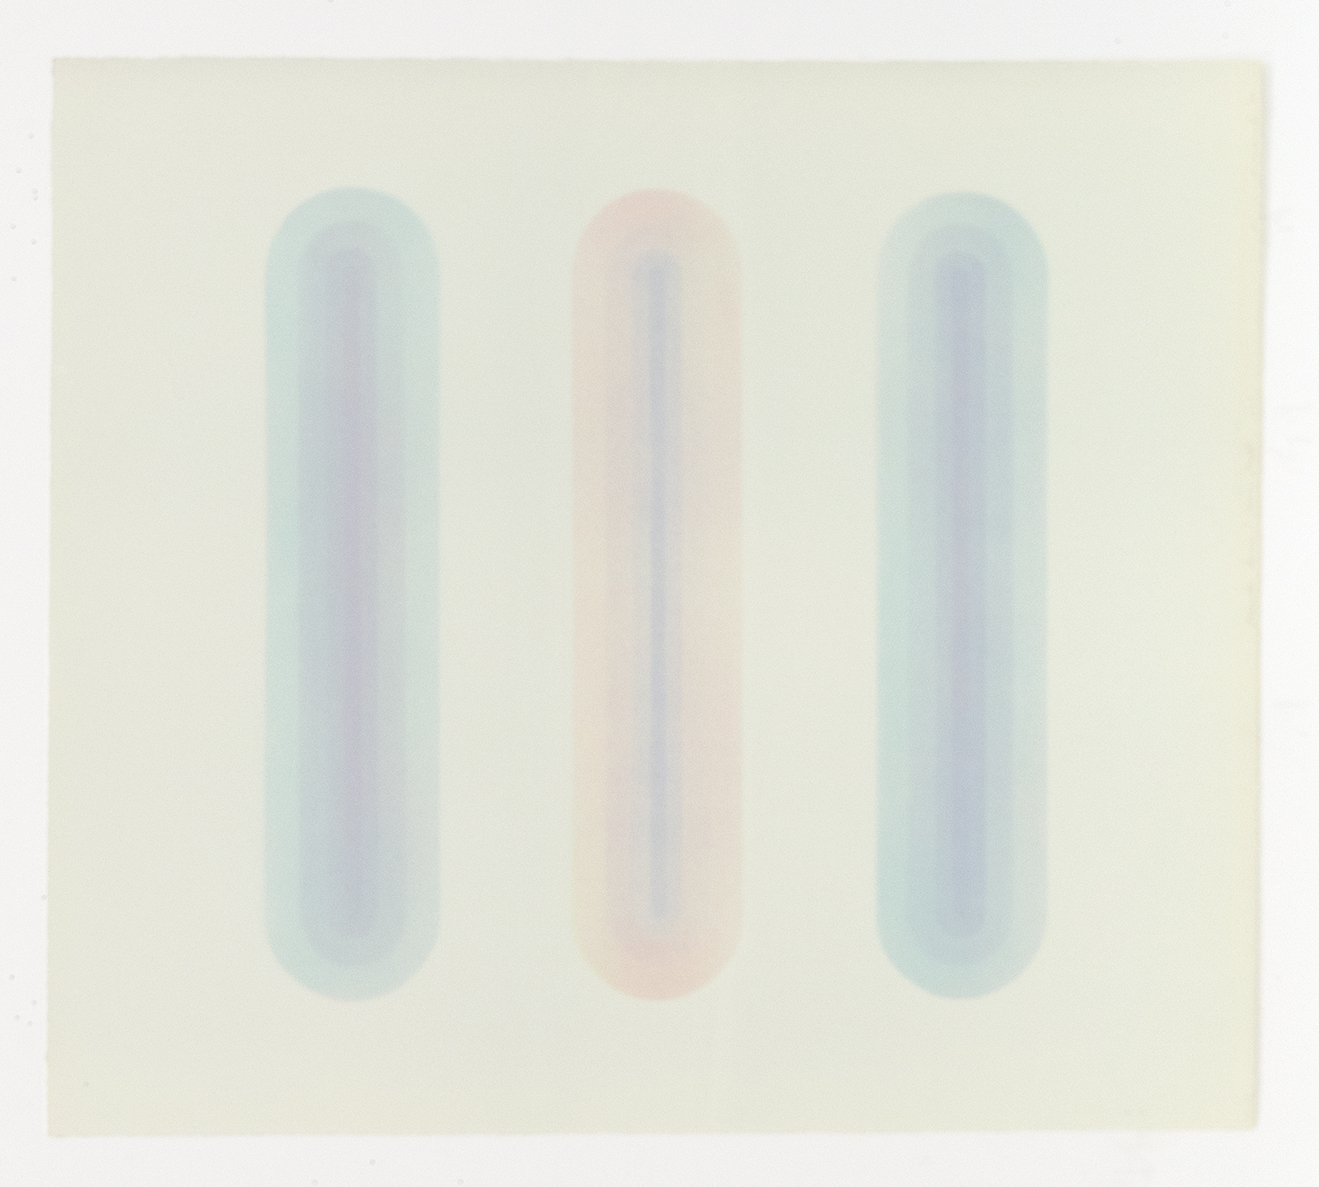 Ripple Series (Three Reflections), 1971 Lithograph 20 1/4 x 22 1/4 inches (56.5 x 51.4 cm) Edition of 12